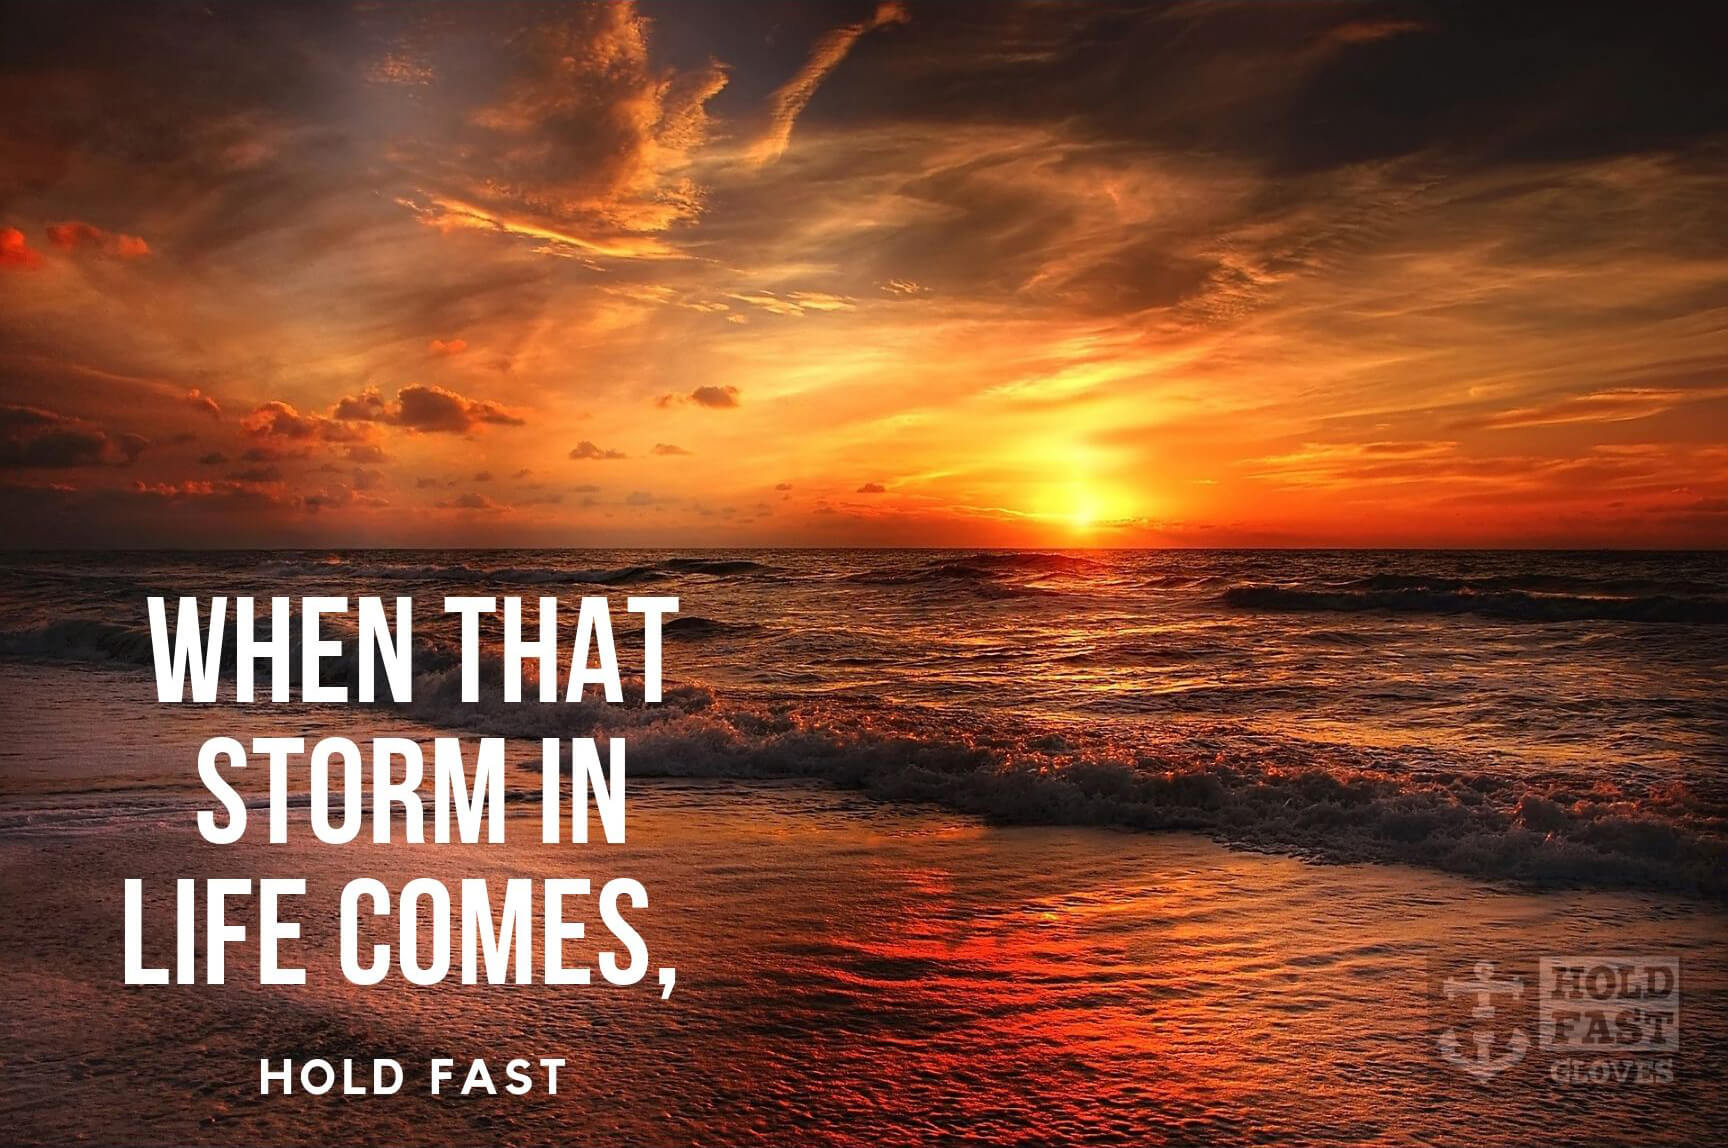 Hold Fast when that storm in life comes.